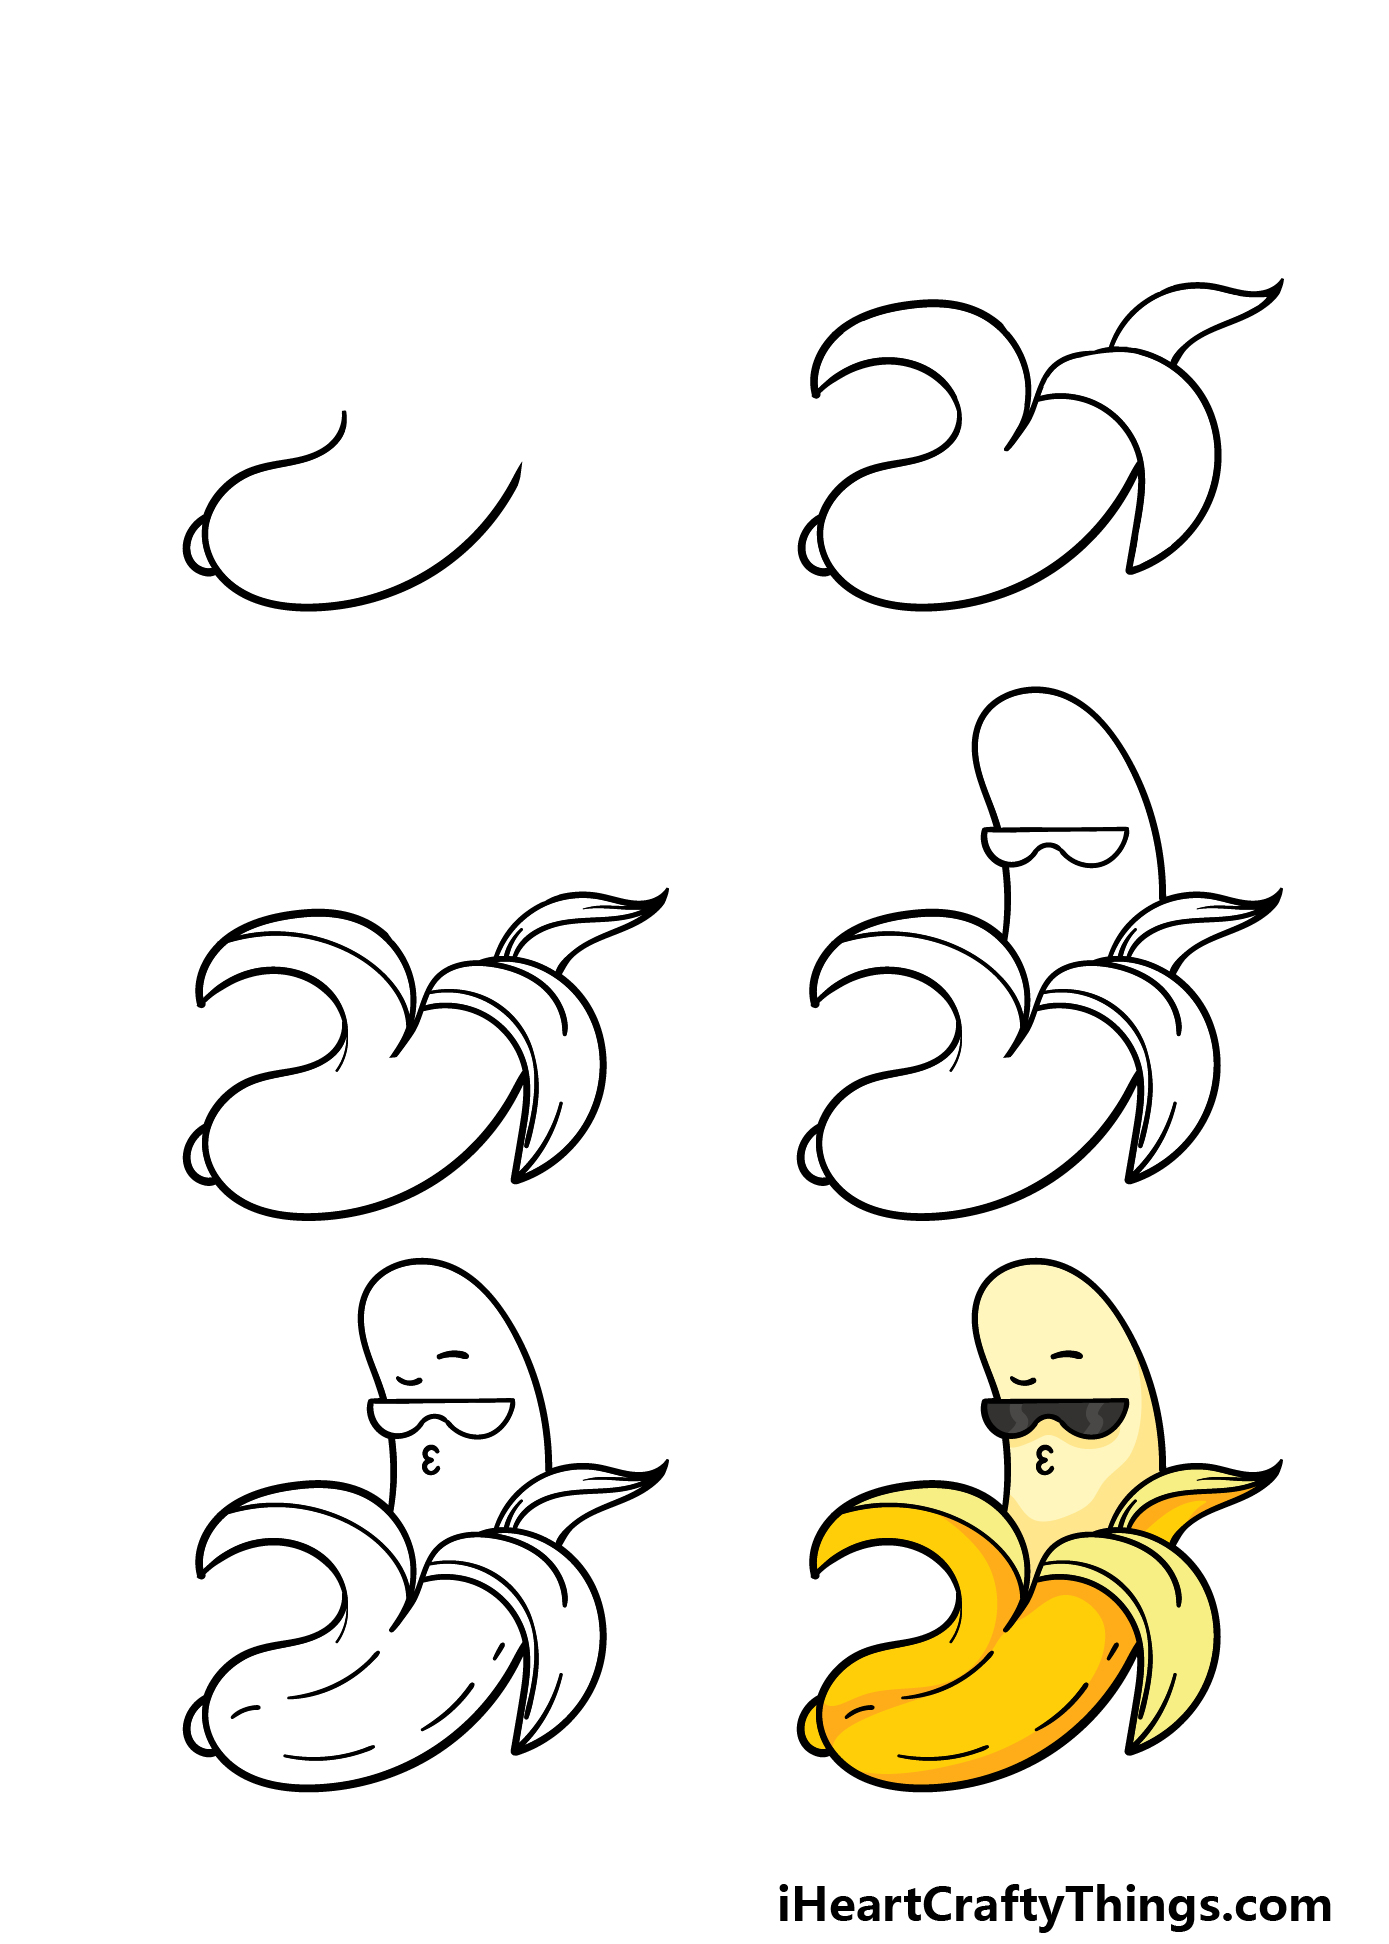 how to draw a Cartoon Banana in 6 steps